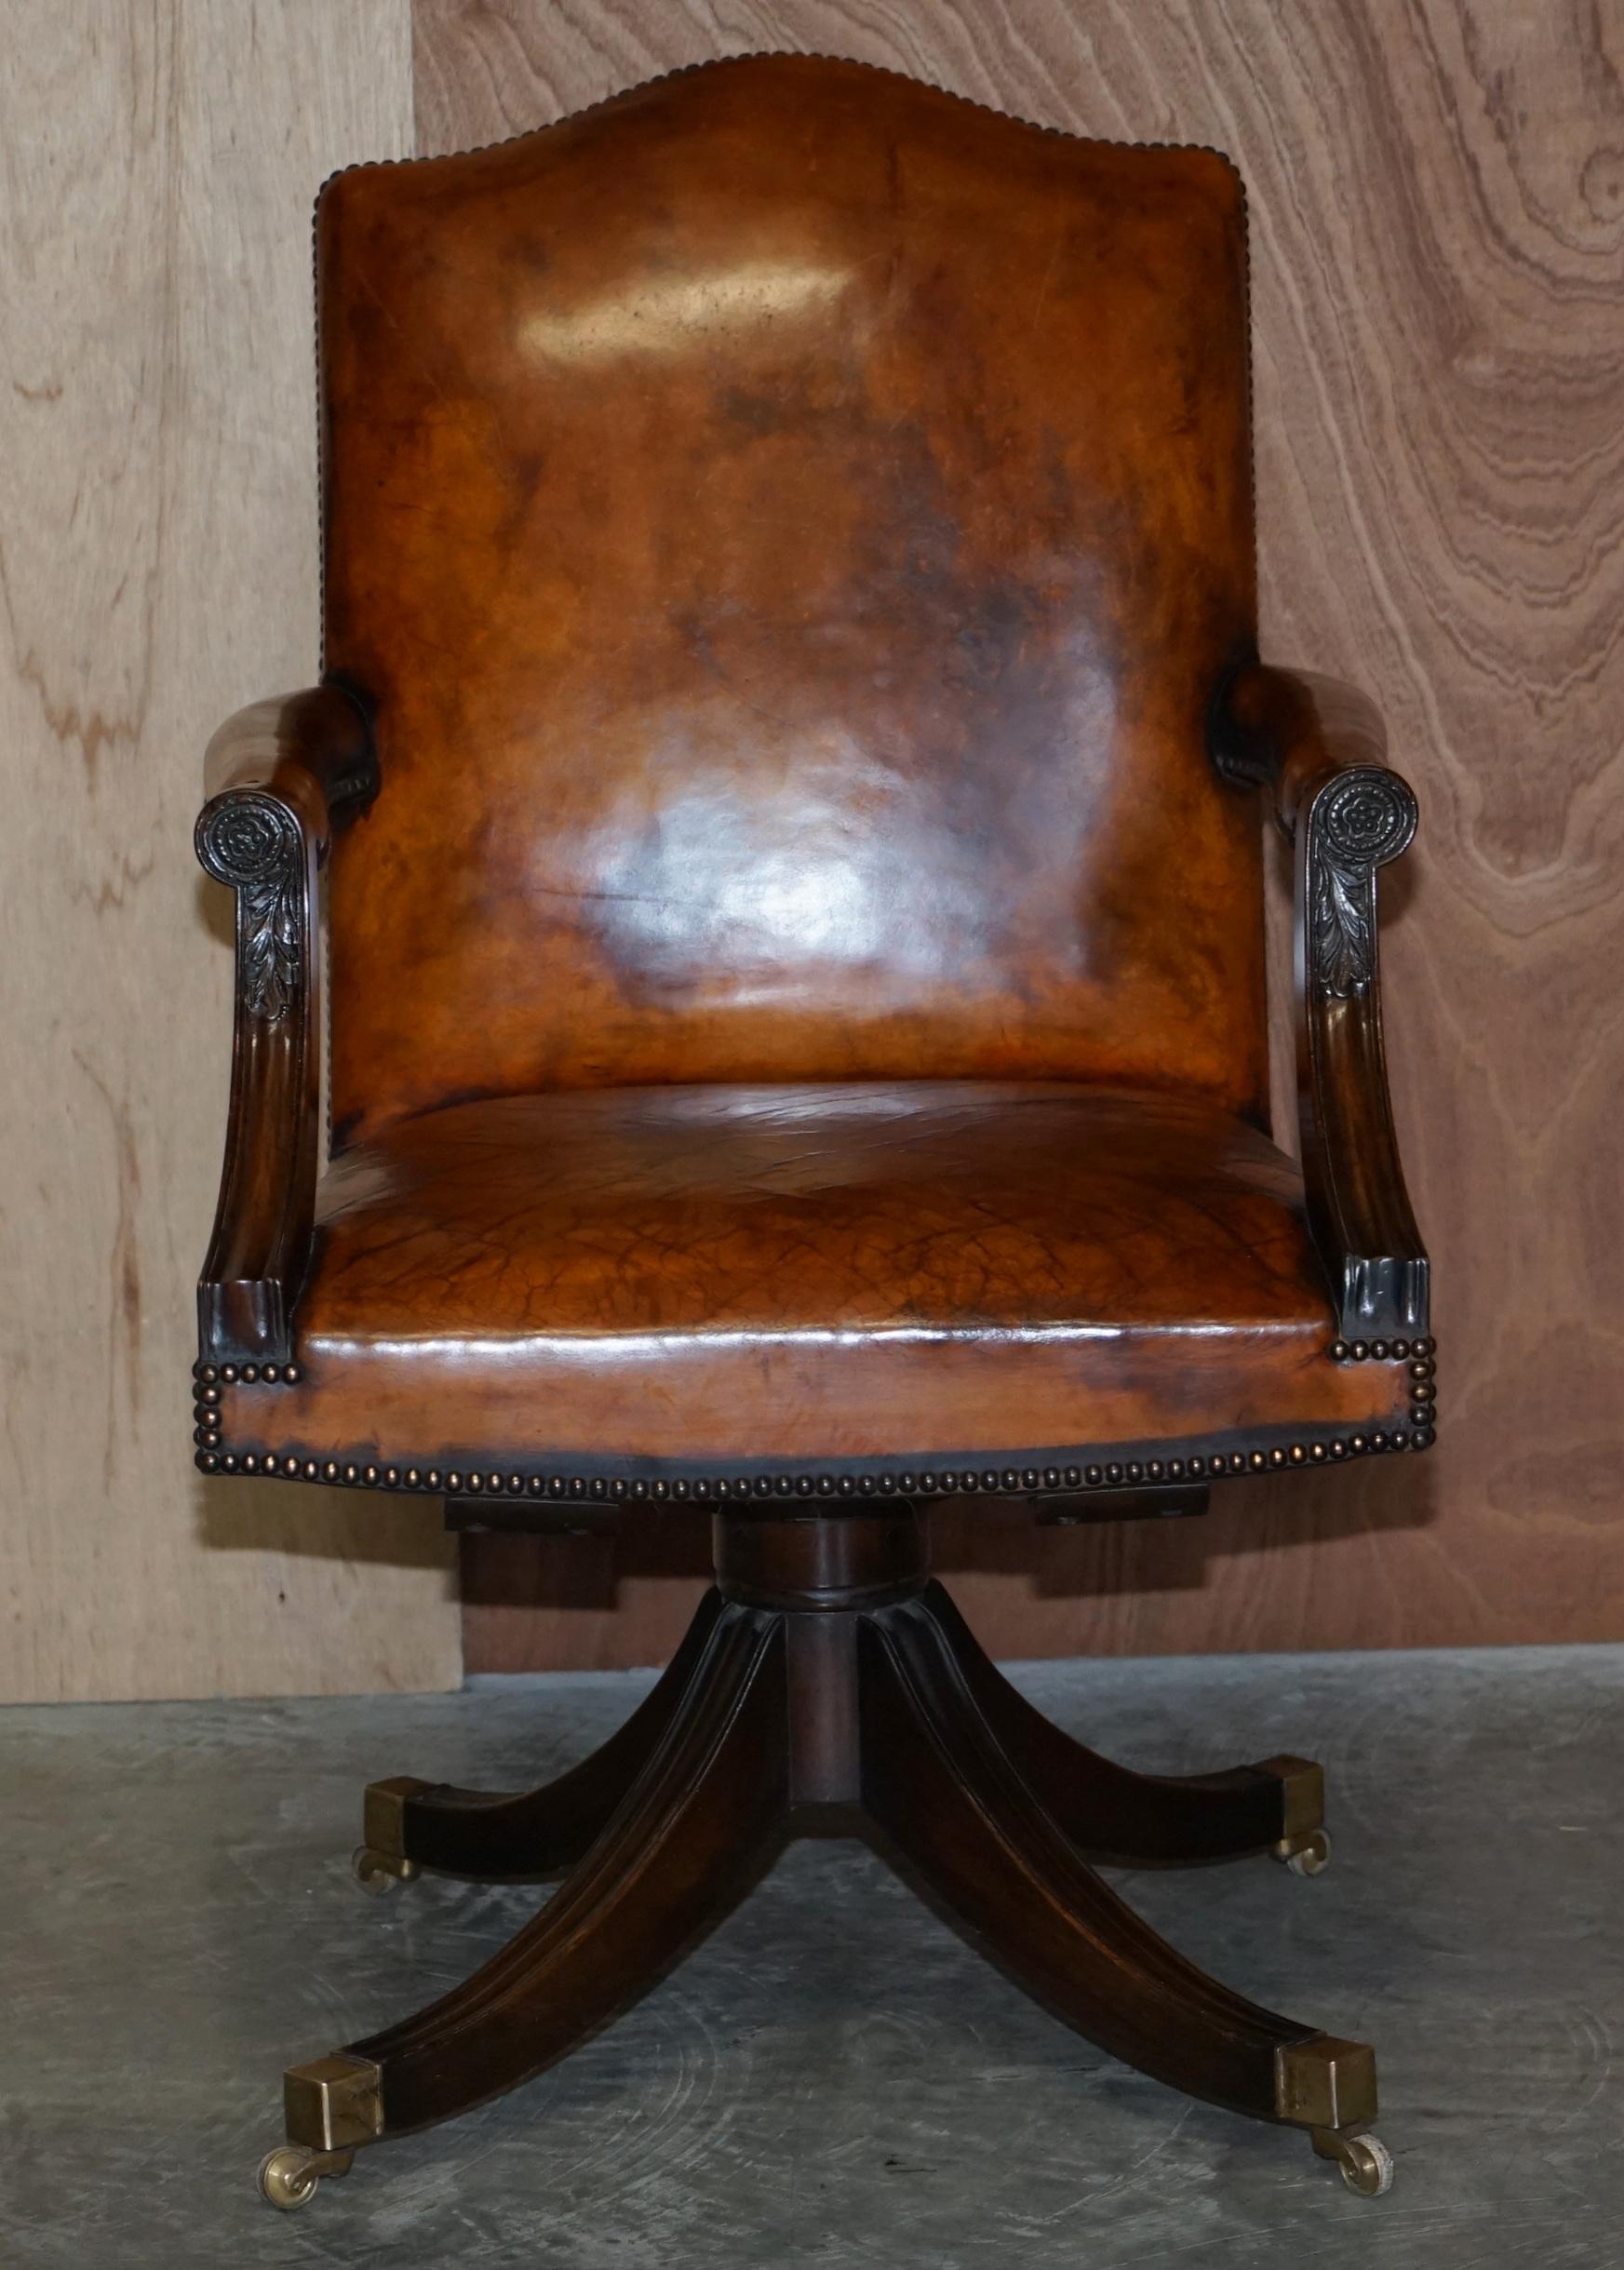 We are delighted to offer for sale this lovely fully restored original oak framed vintage hand dyed cigar brown leather directors chair.

A very good looking well made and comfortable directors chair, I've not seen one with a solid oak frame like